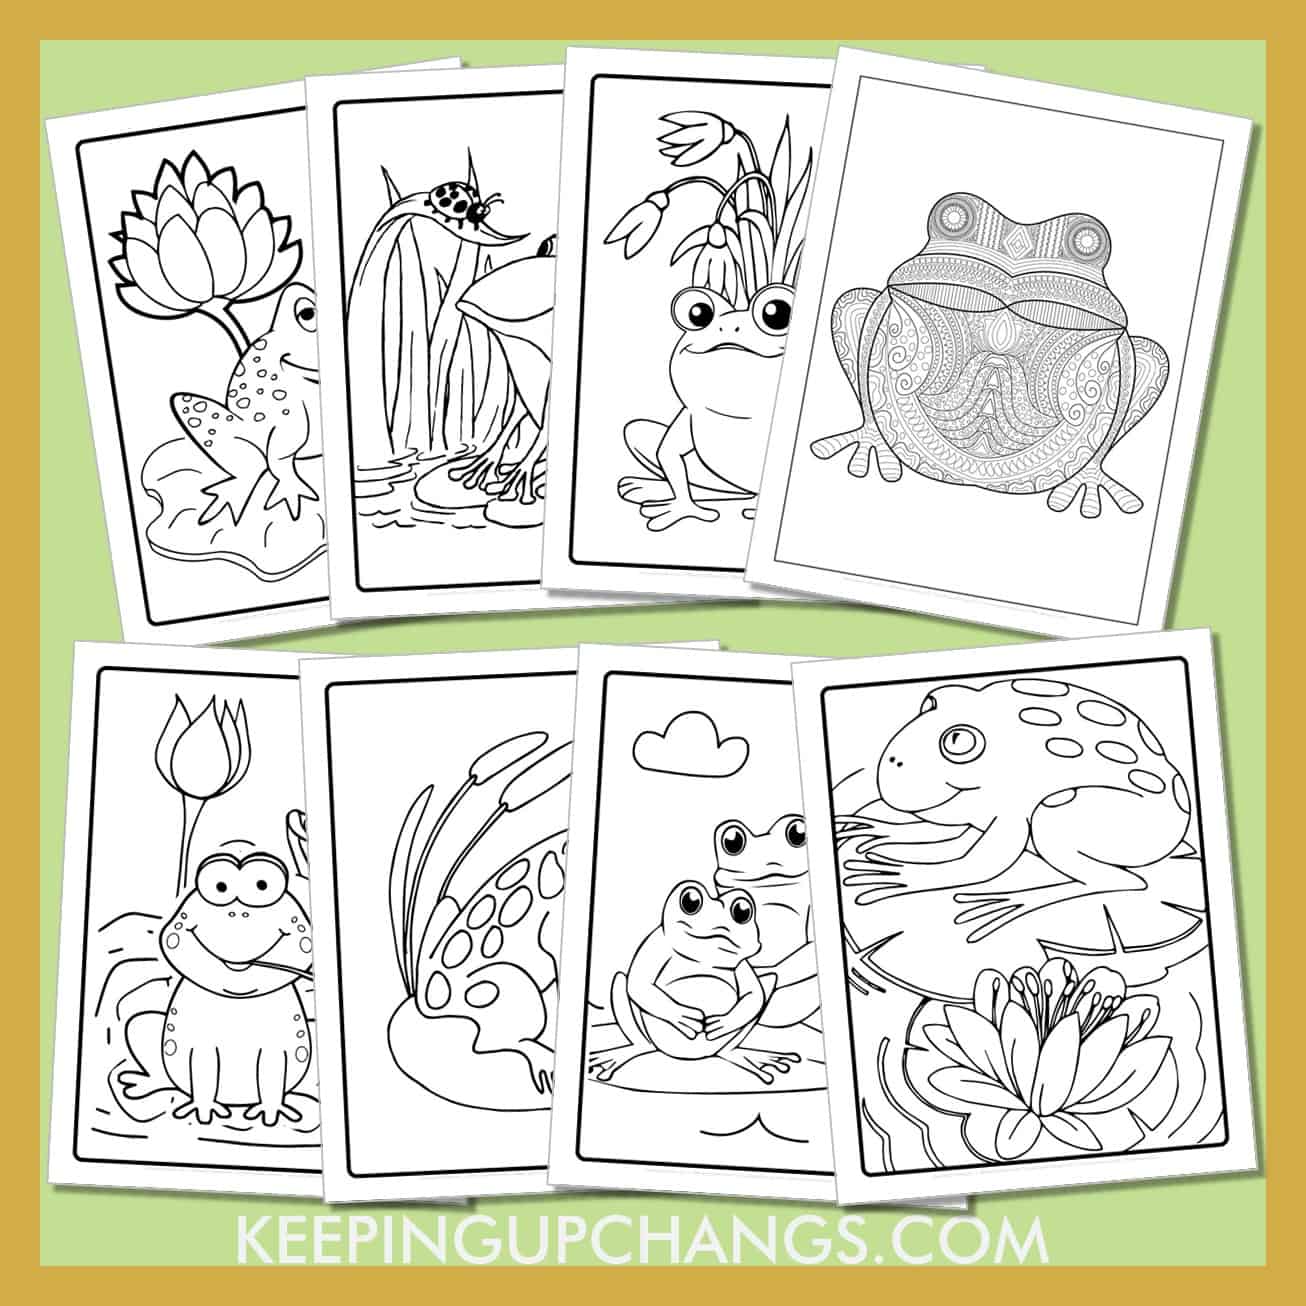 free frog to color for toddlers, kids, adults.